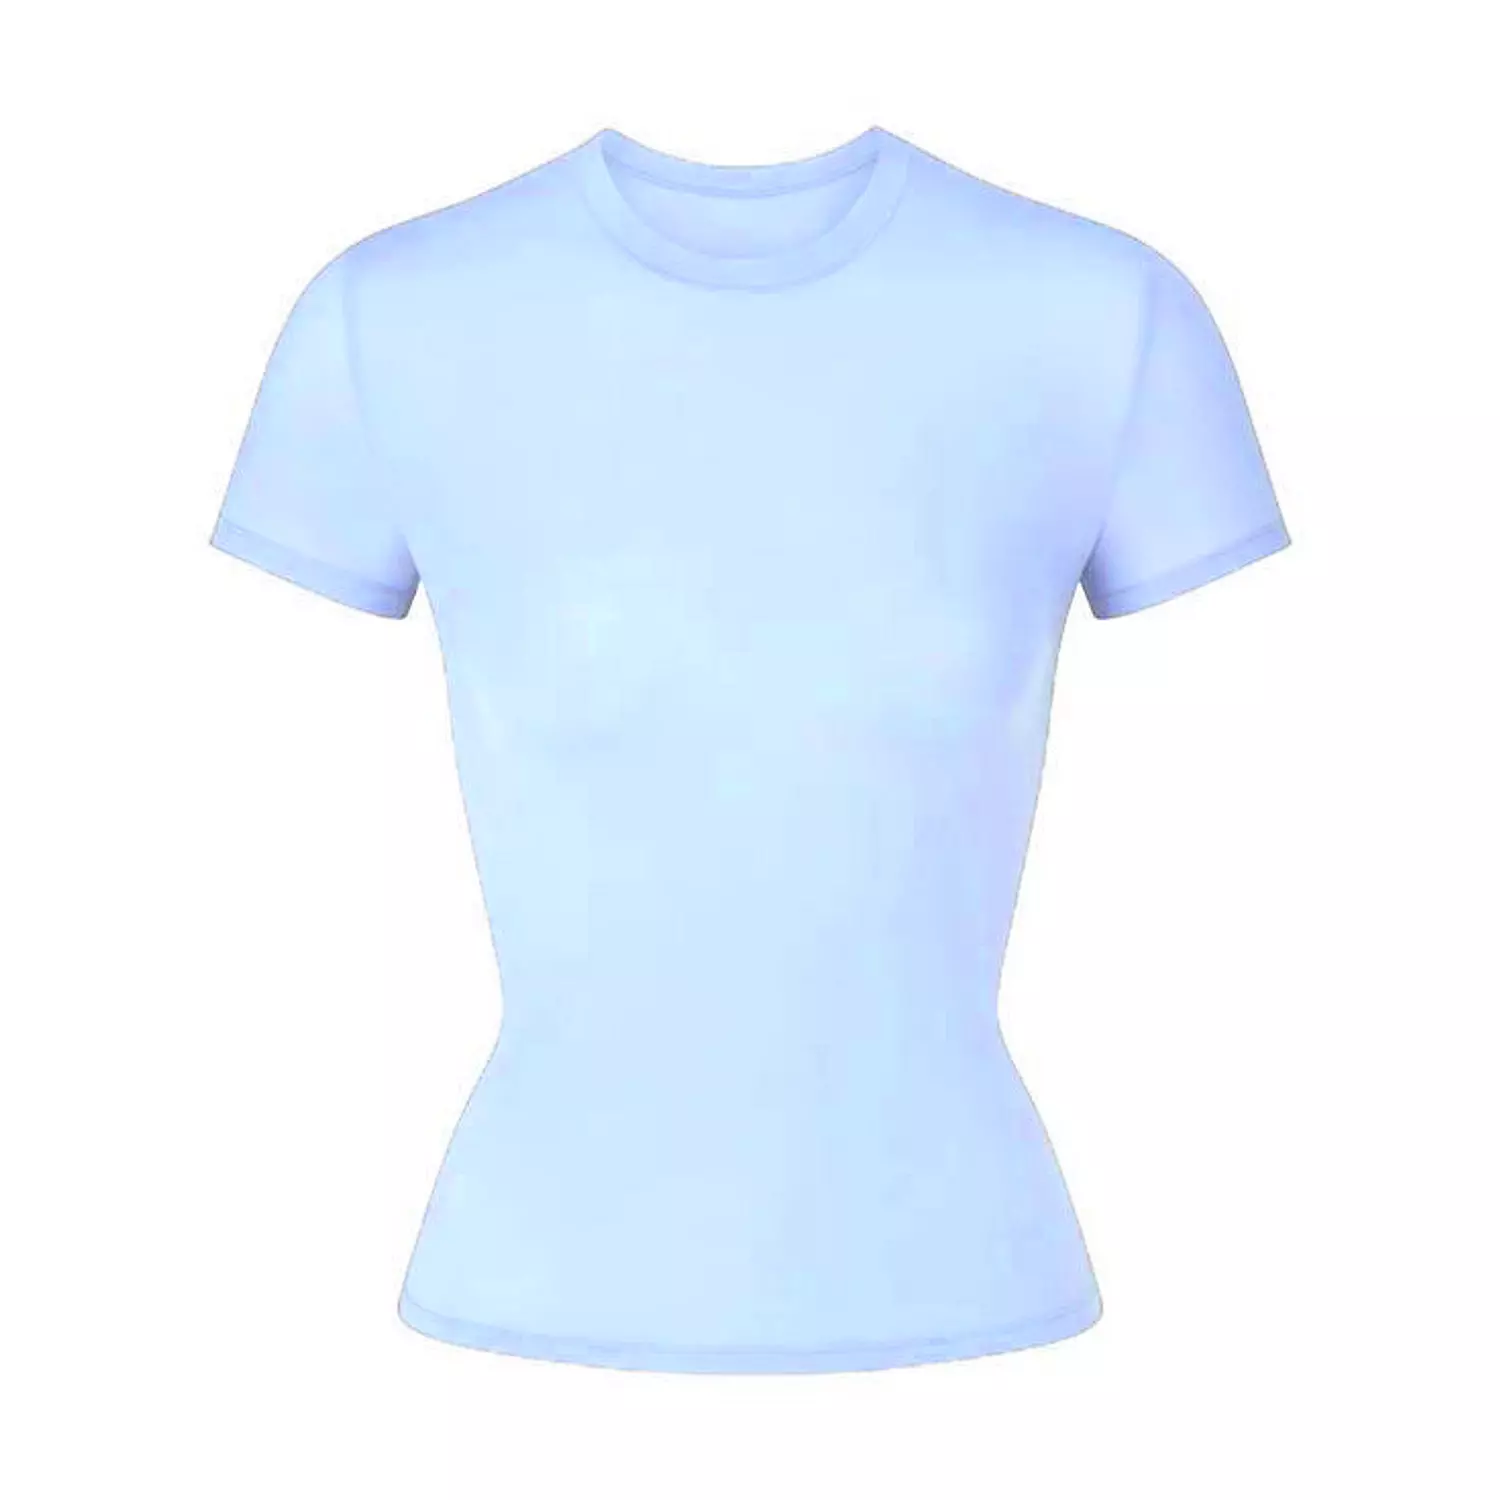 Baby Blue Basic Top  hover image